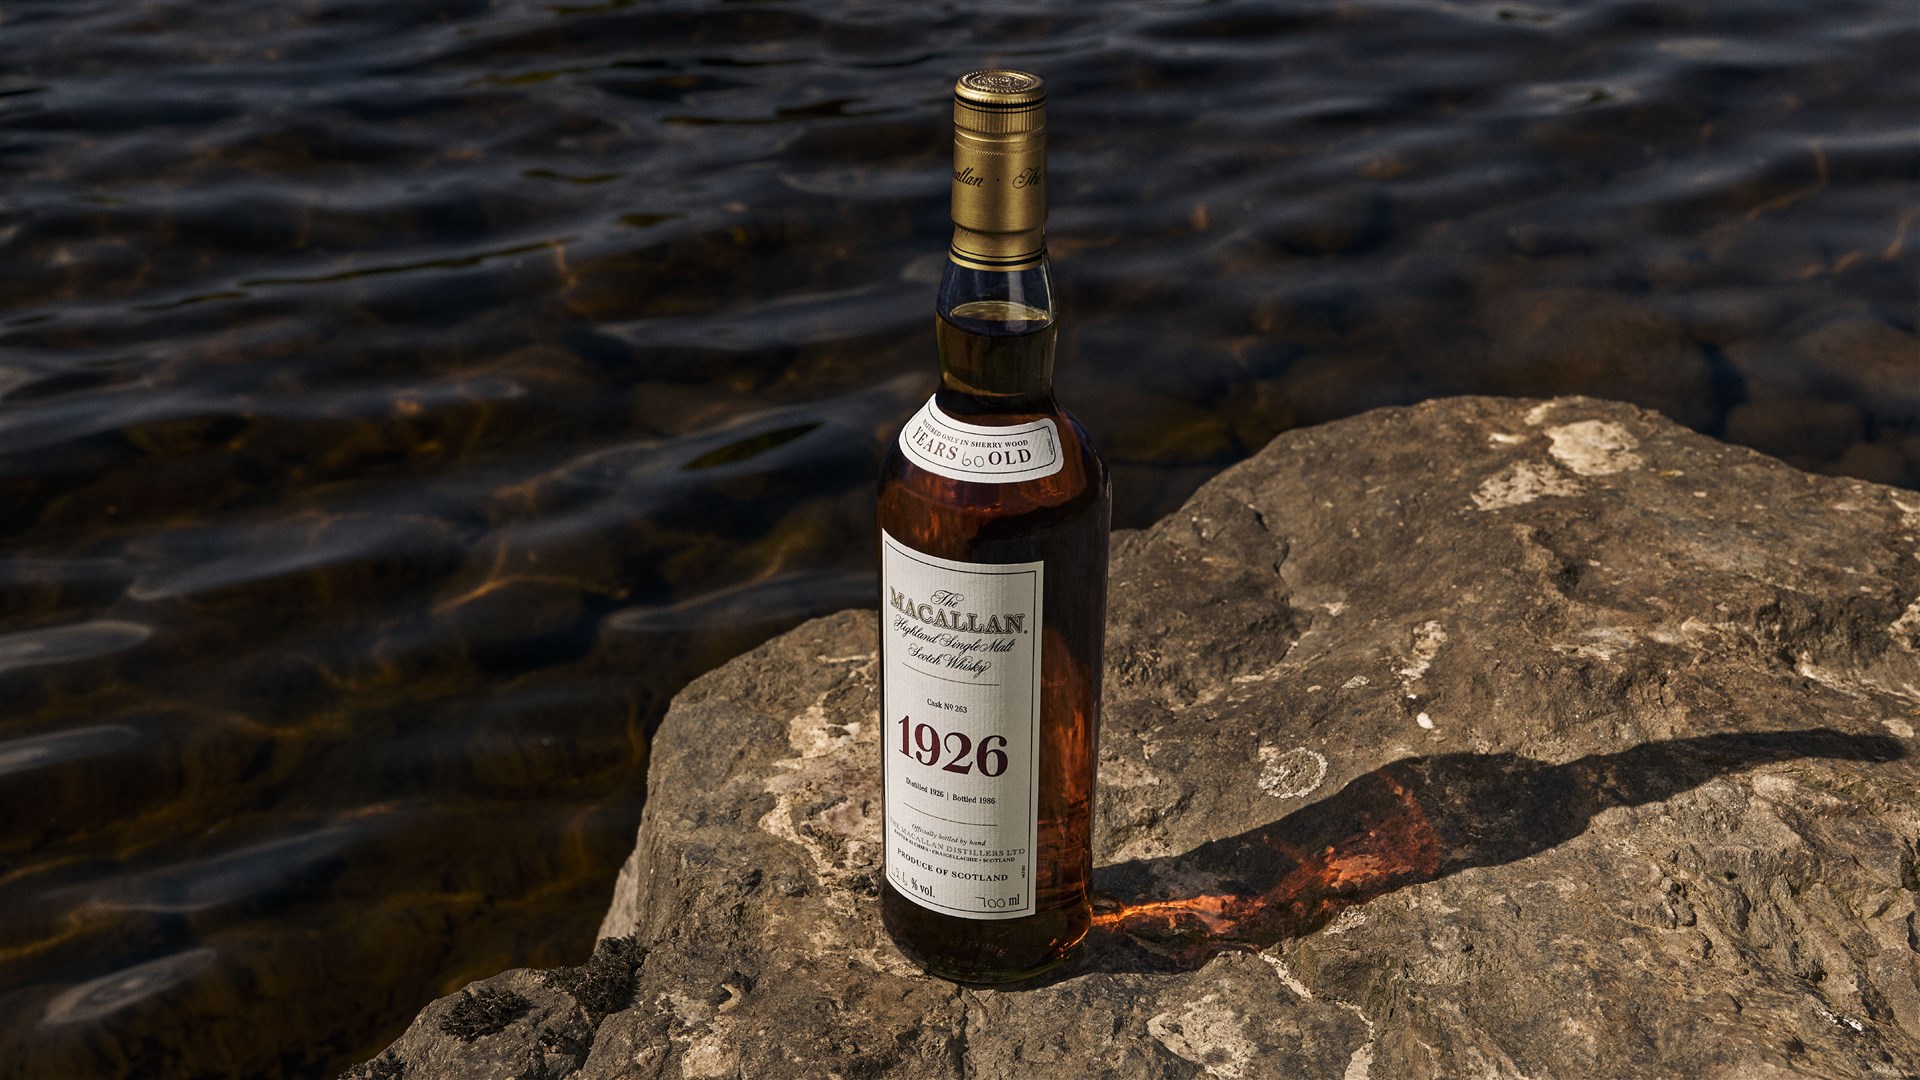 The single malt which sold for £1.5 million in 2019, making it the most expensive ever sold.